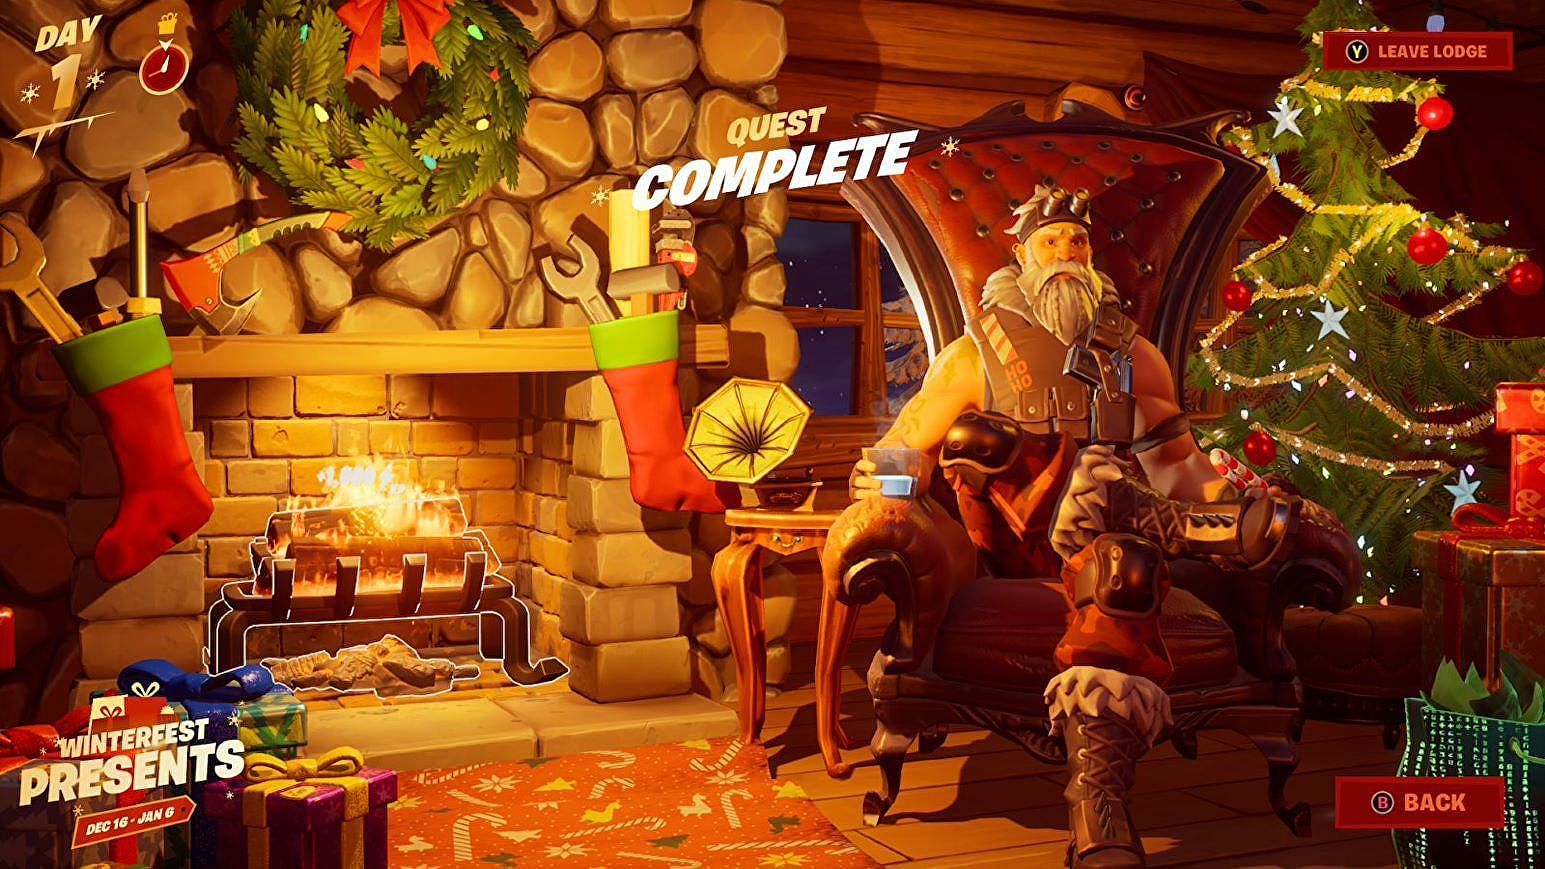 How to warm yourself at the Yule Log in Cozy Lodge in Fortnite WinterFest 2021 (Image via Epic Games)